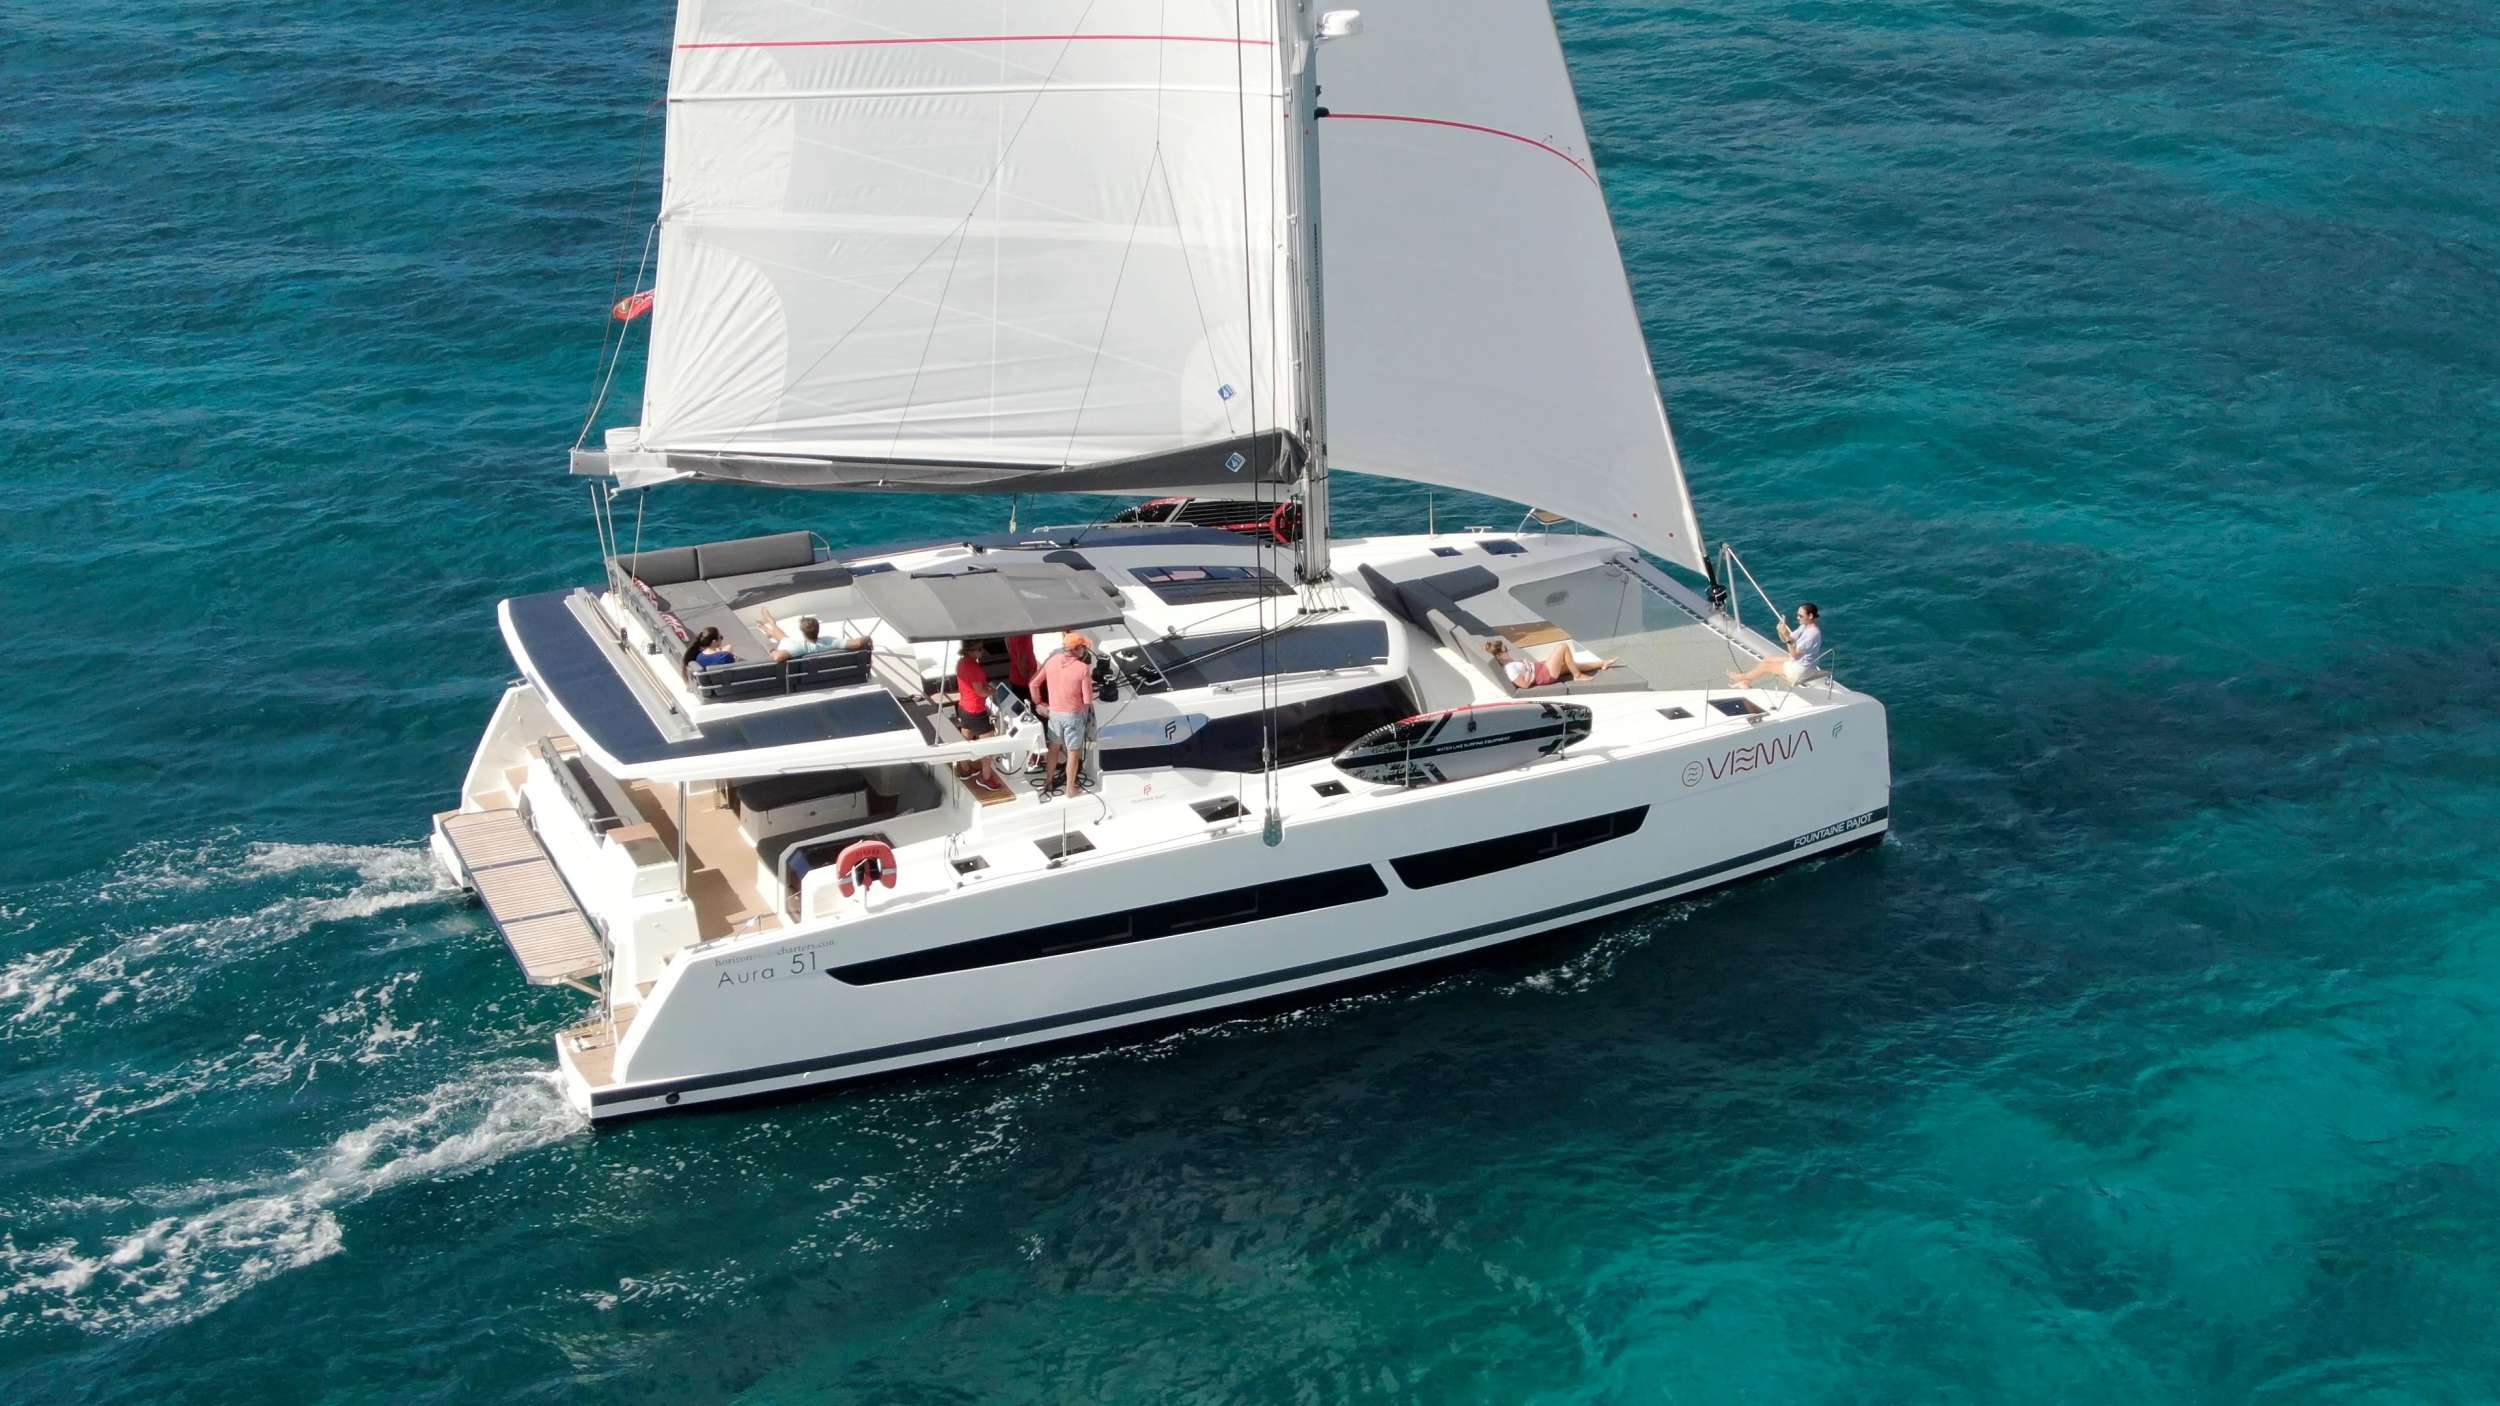 VIENNA Yacht Charter - Ritzy Charters